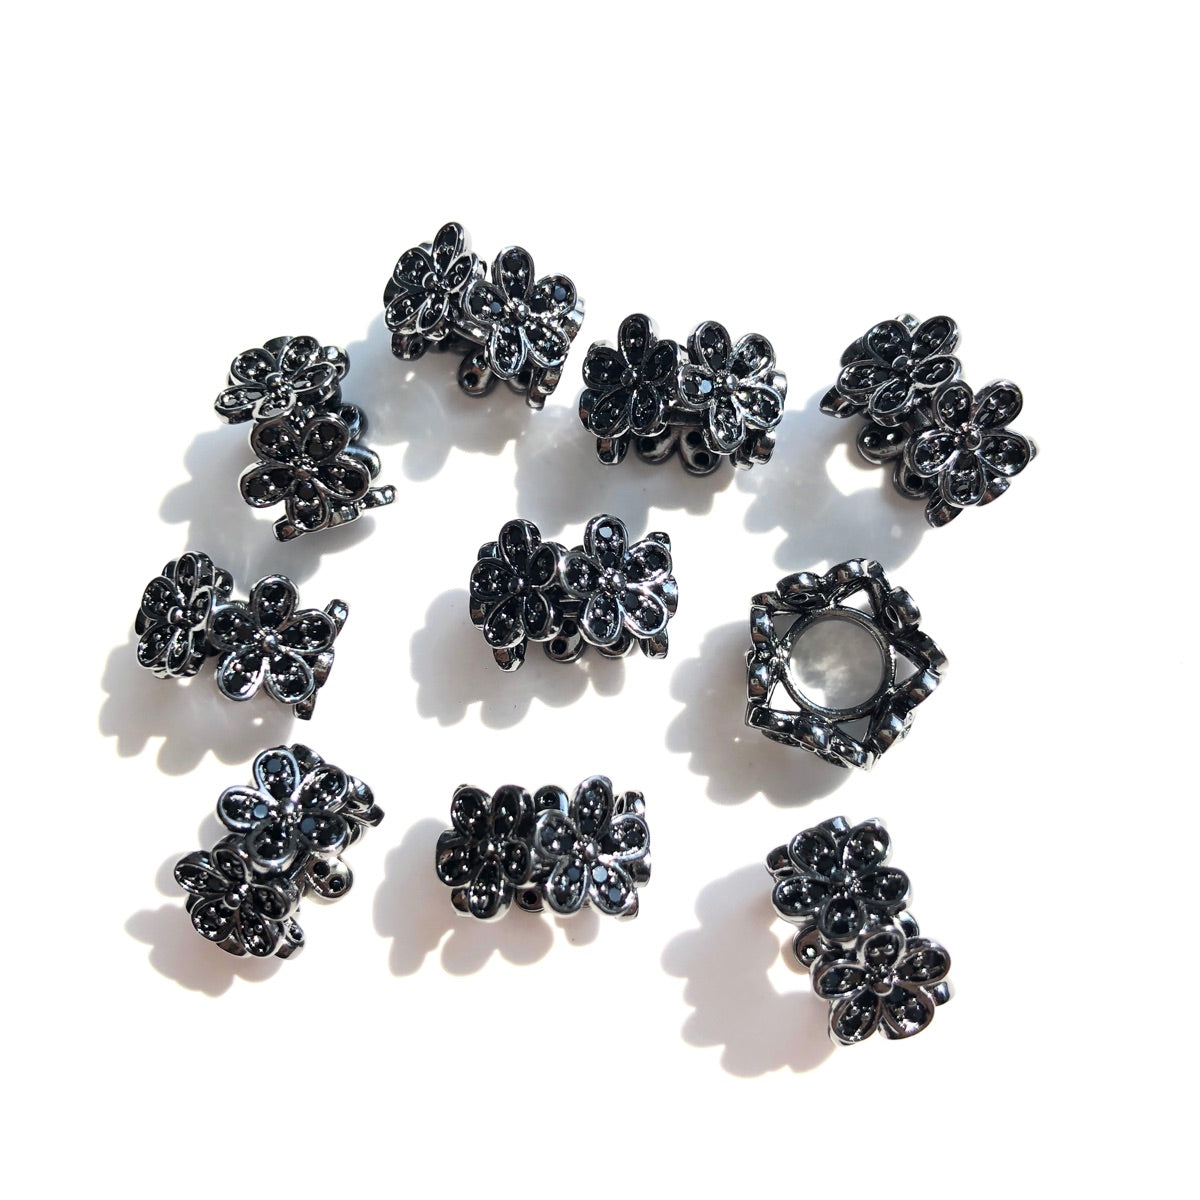 10-20-50pcs/lot 10.6*6.8mm CZ Paved Flower Spacers Black on Black CZ Paved Spacers New Spacers Arrivals Wholesale Charms Beads Beyond